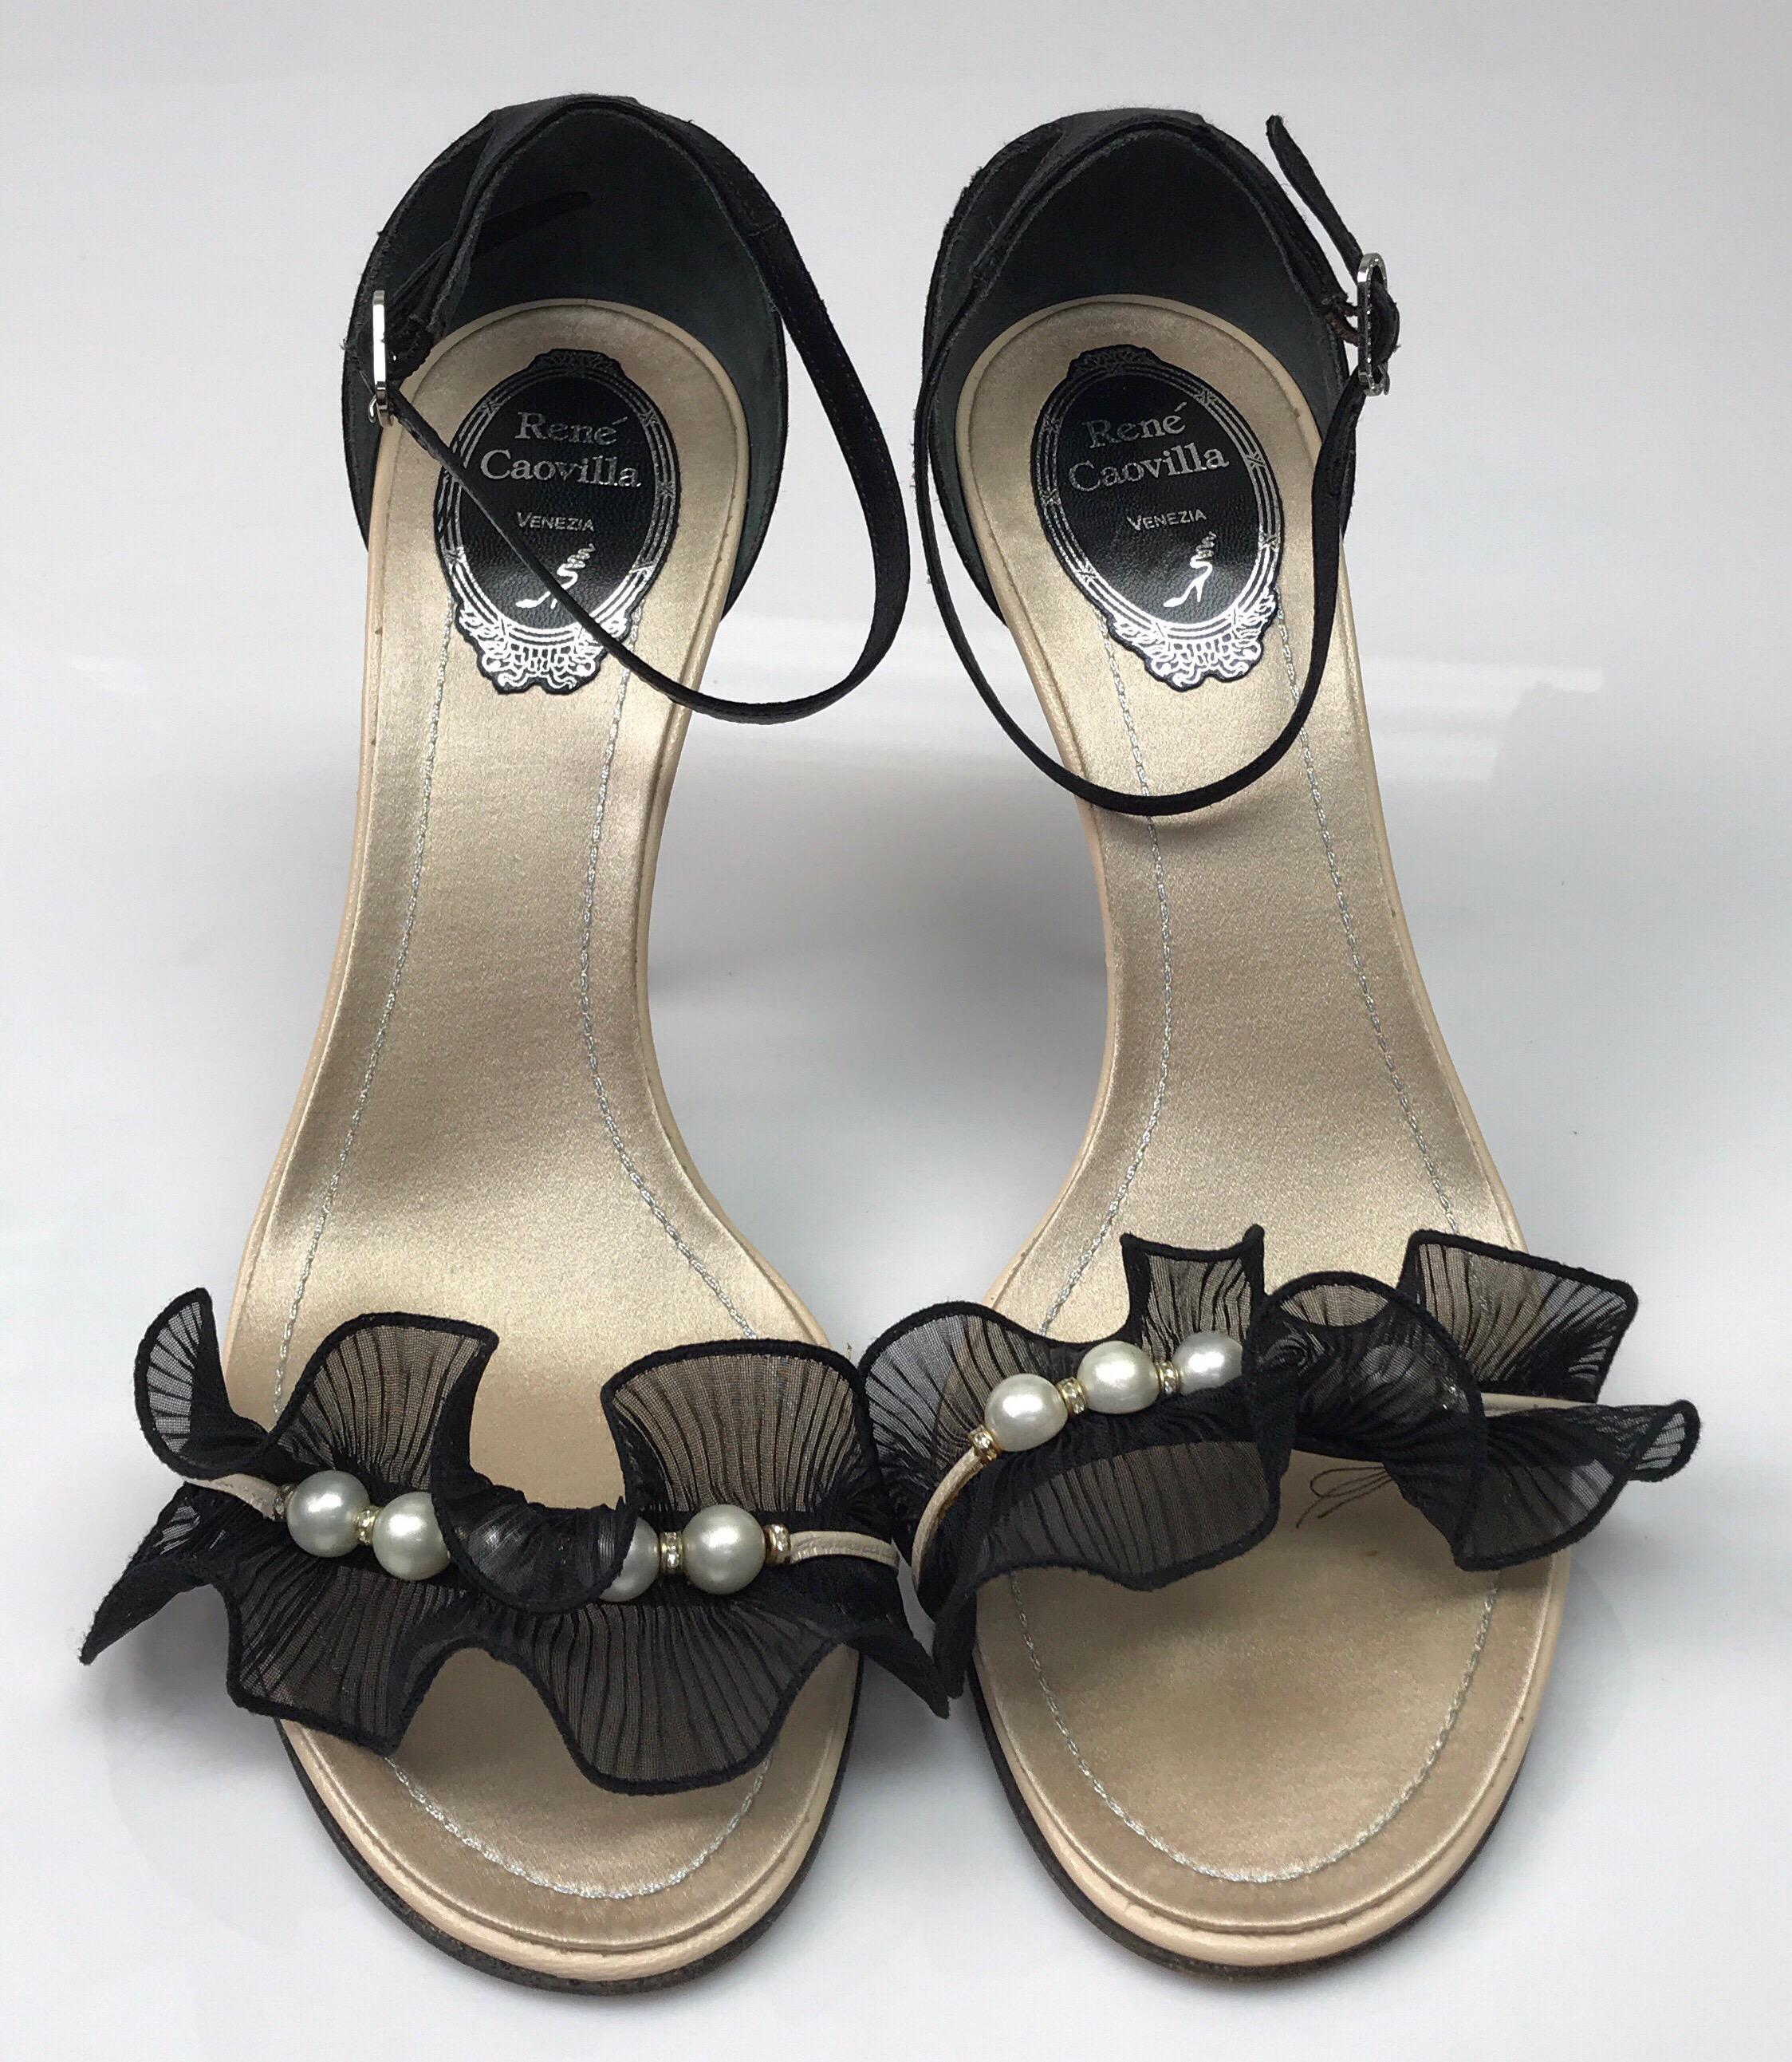 Rene Caovilla black heel w/ ruffle & pearl detail on toe strap-39. These elegant Rene Caovilla heels are in great condition. They show minor signs of wear, including the bottom of the shoe where some of the sparkles are rubbed off. The shoe is made